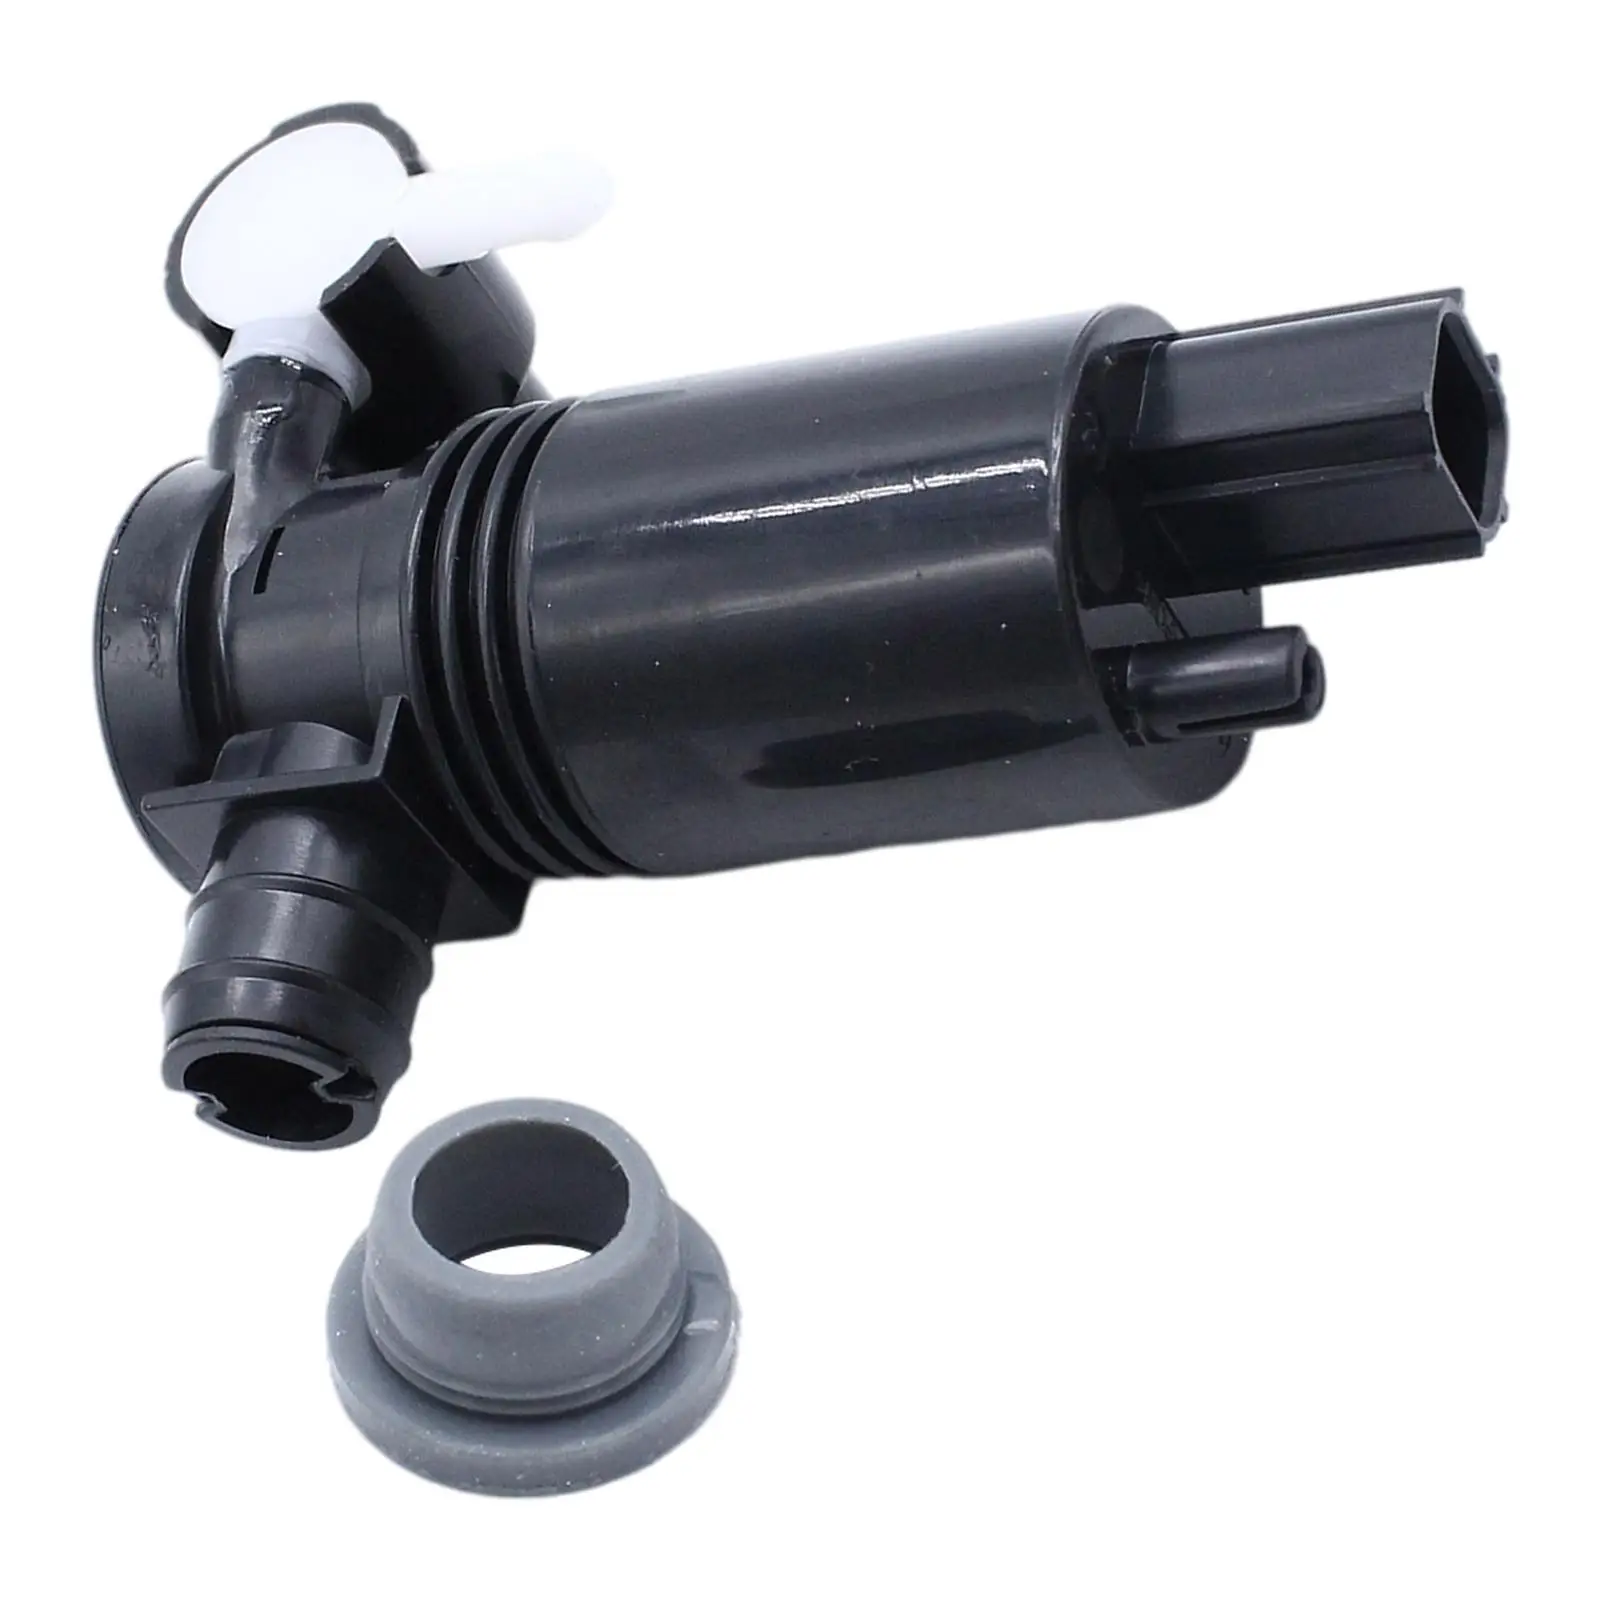 Windshield Washer Pump with Grommet Motor Jet 1014003 Fluid Pump Replace for Ford Fiesta MK6 02-15 Car